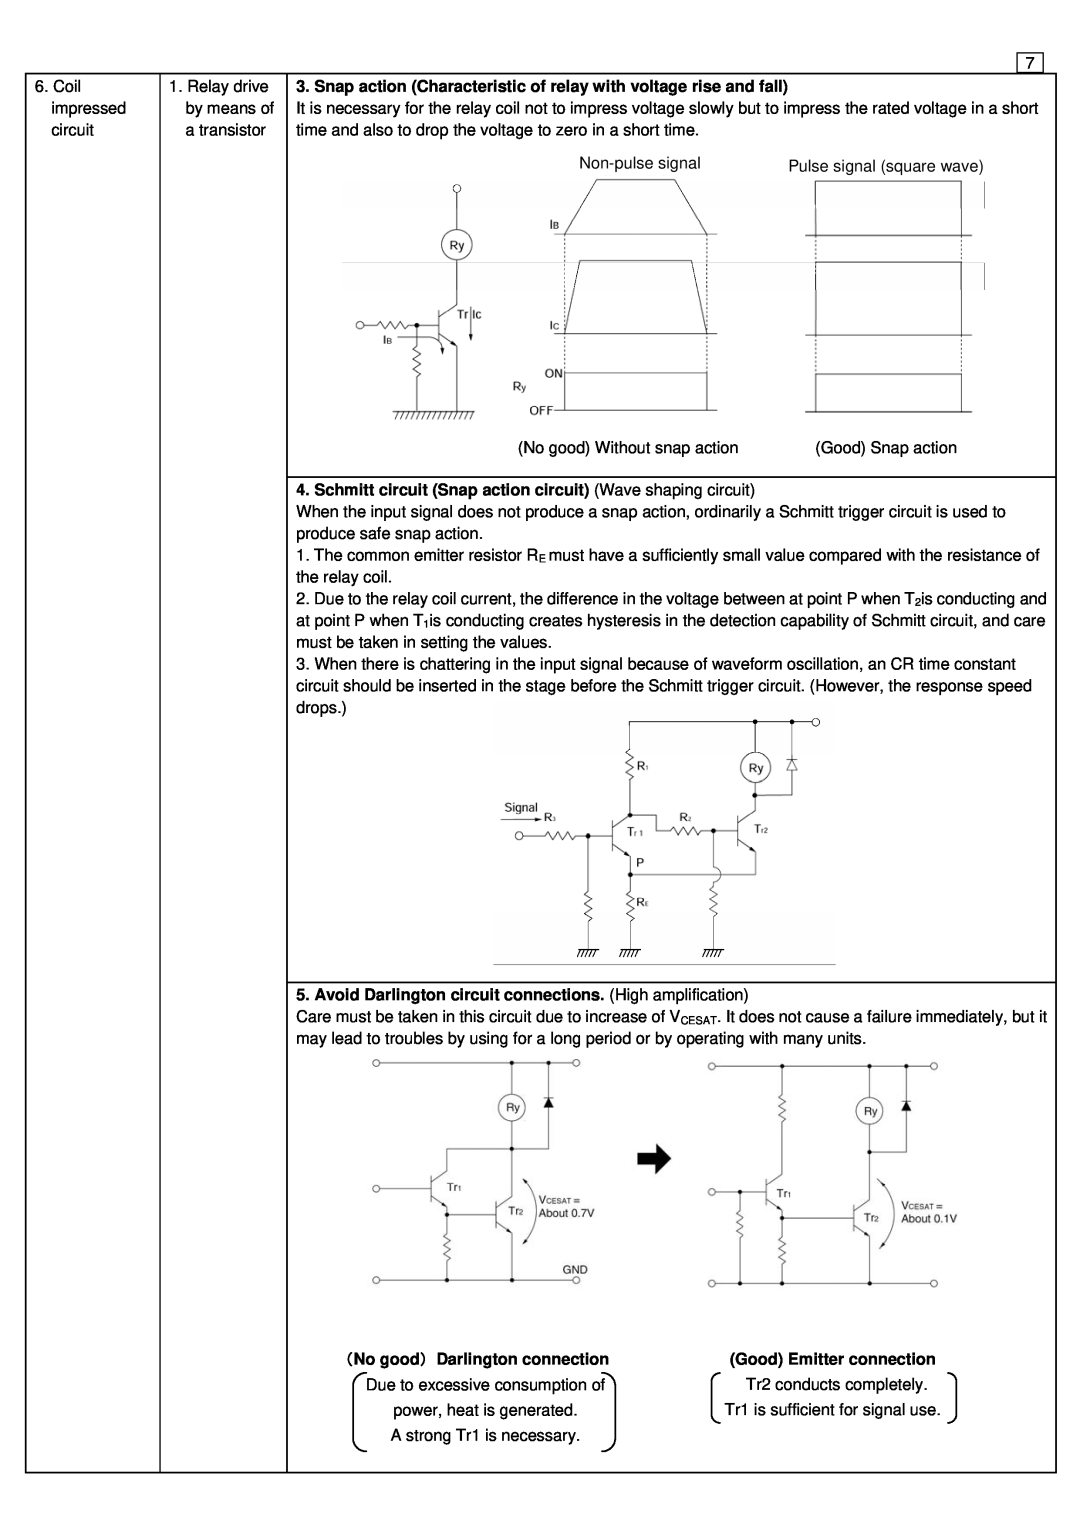 Panasonic ASCT1F46E manual Snap action Characteristic of relay with voltage rise and fall, （No good ） Darlington connection 